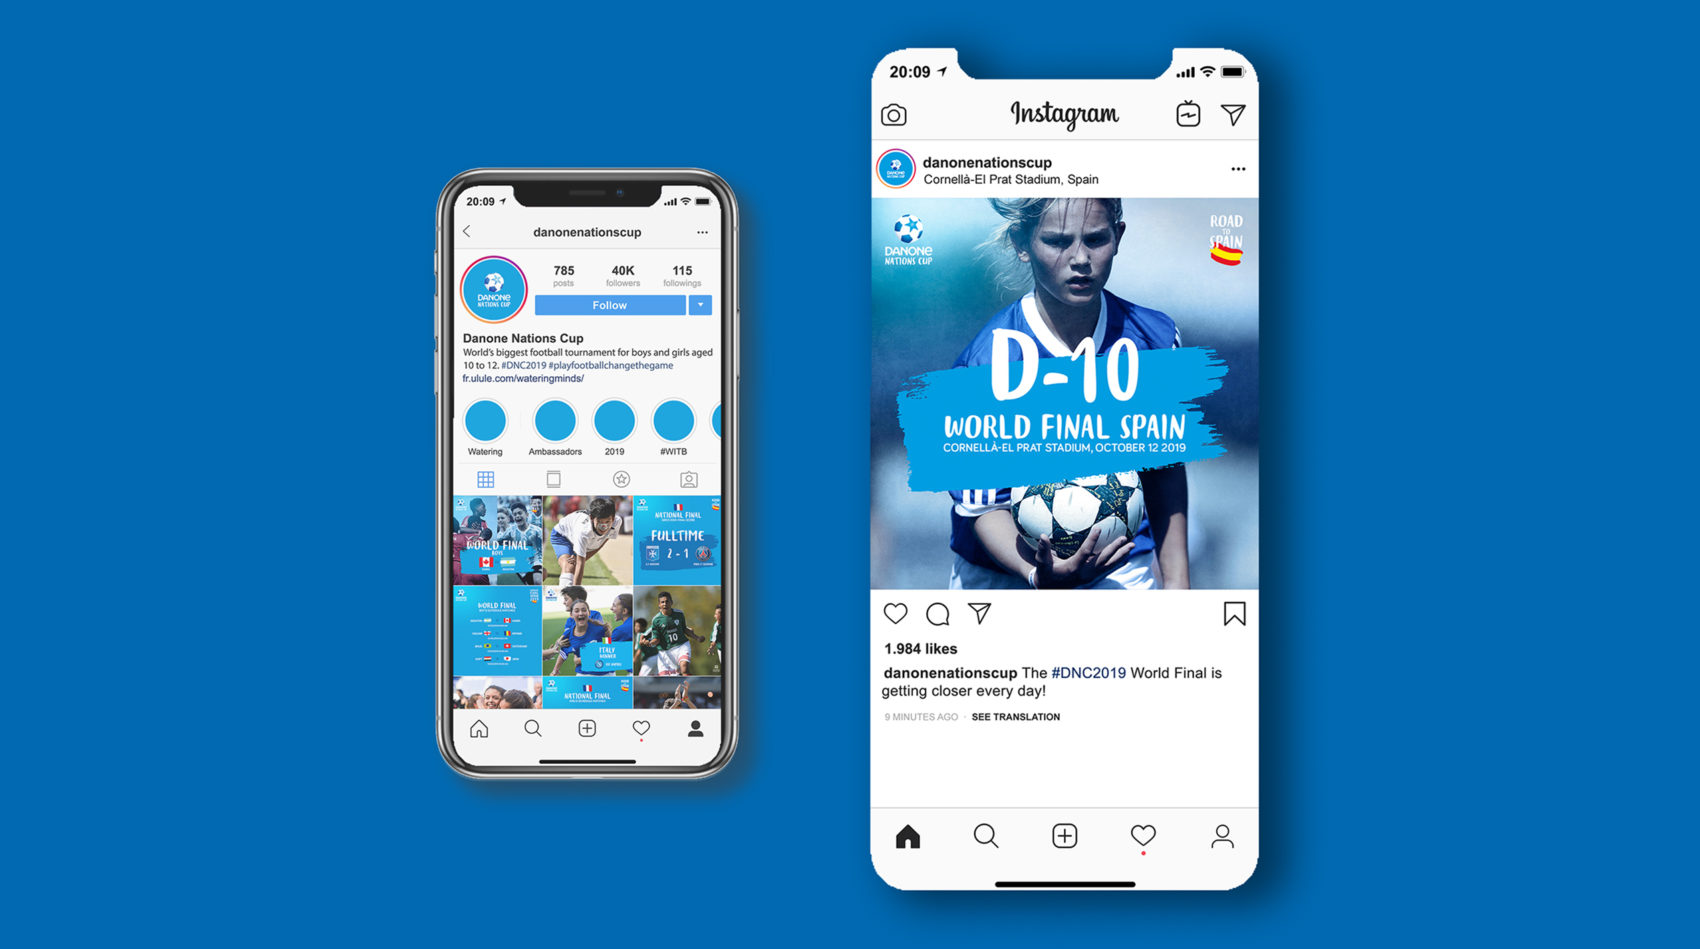 Projet_project_Danone_Nations_Cup_edition_2019_campagne_campaign_communication_globale_global_branding_3